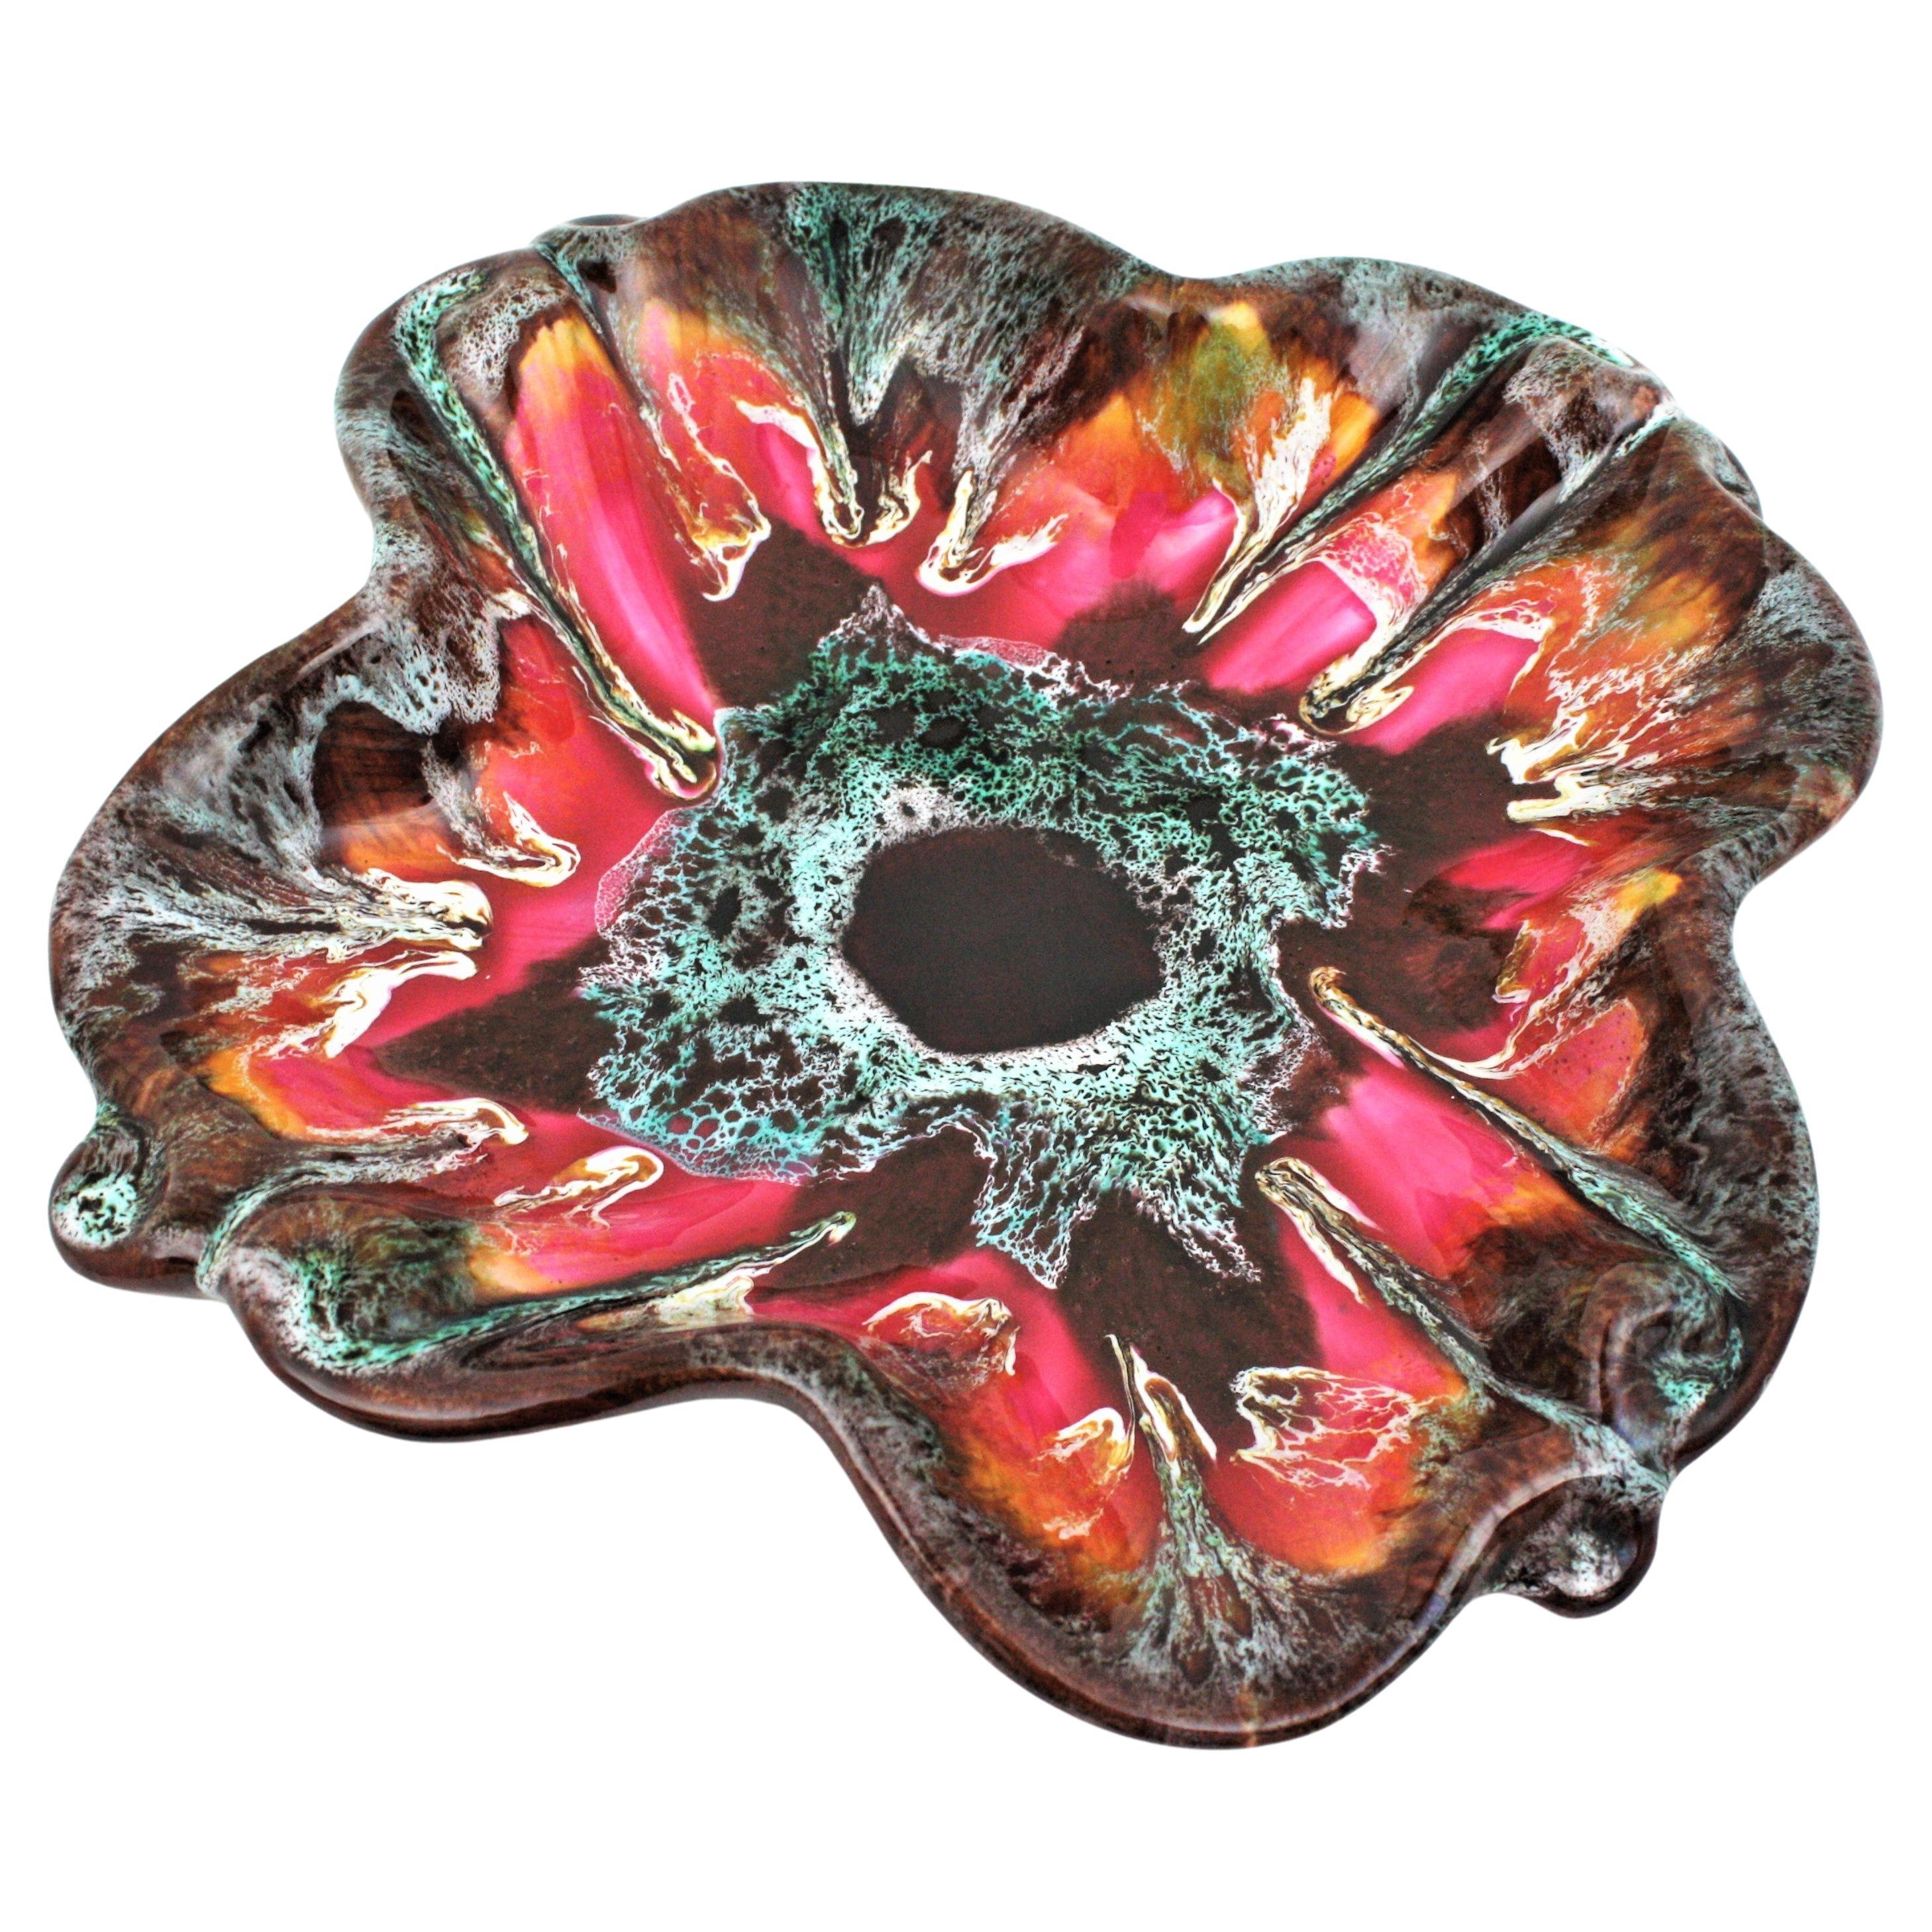 Mid-Century Modern multicolor glazed ceramic flower centerpiece bowl. Manufactured by Vallauris, France, 1950-1960.
Eye-catching and colorful flower shaped glazed ceramic platter or centerpiece bowl. Fat lava design in shades of red, orange, amber